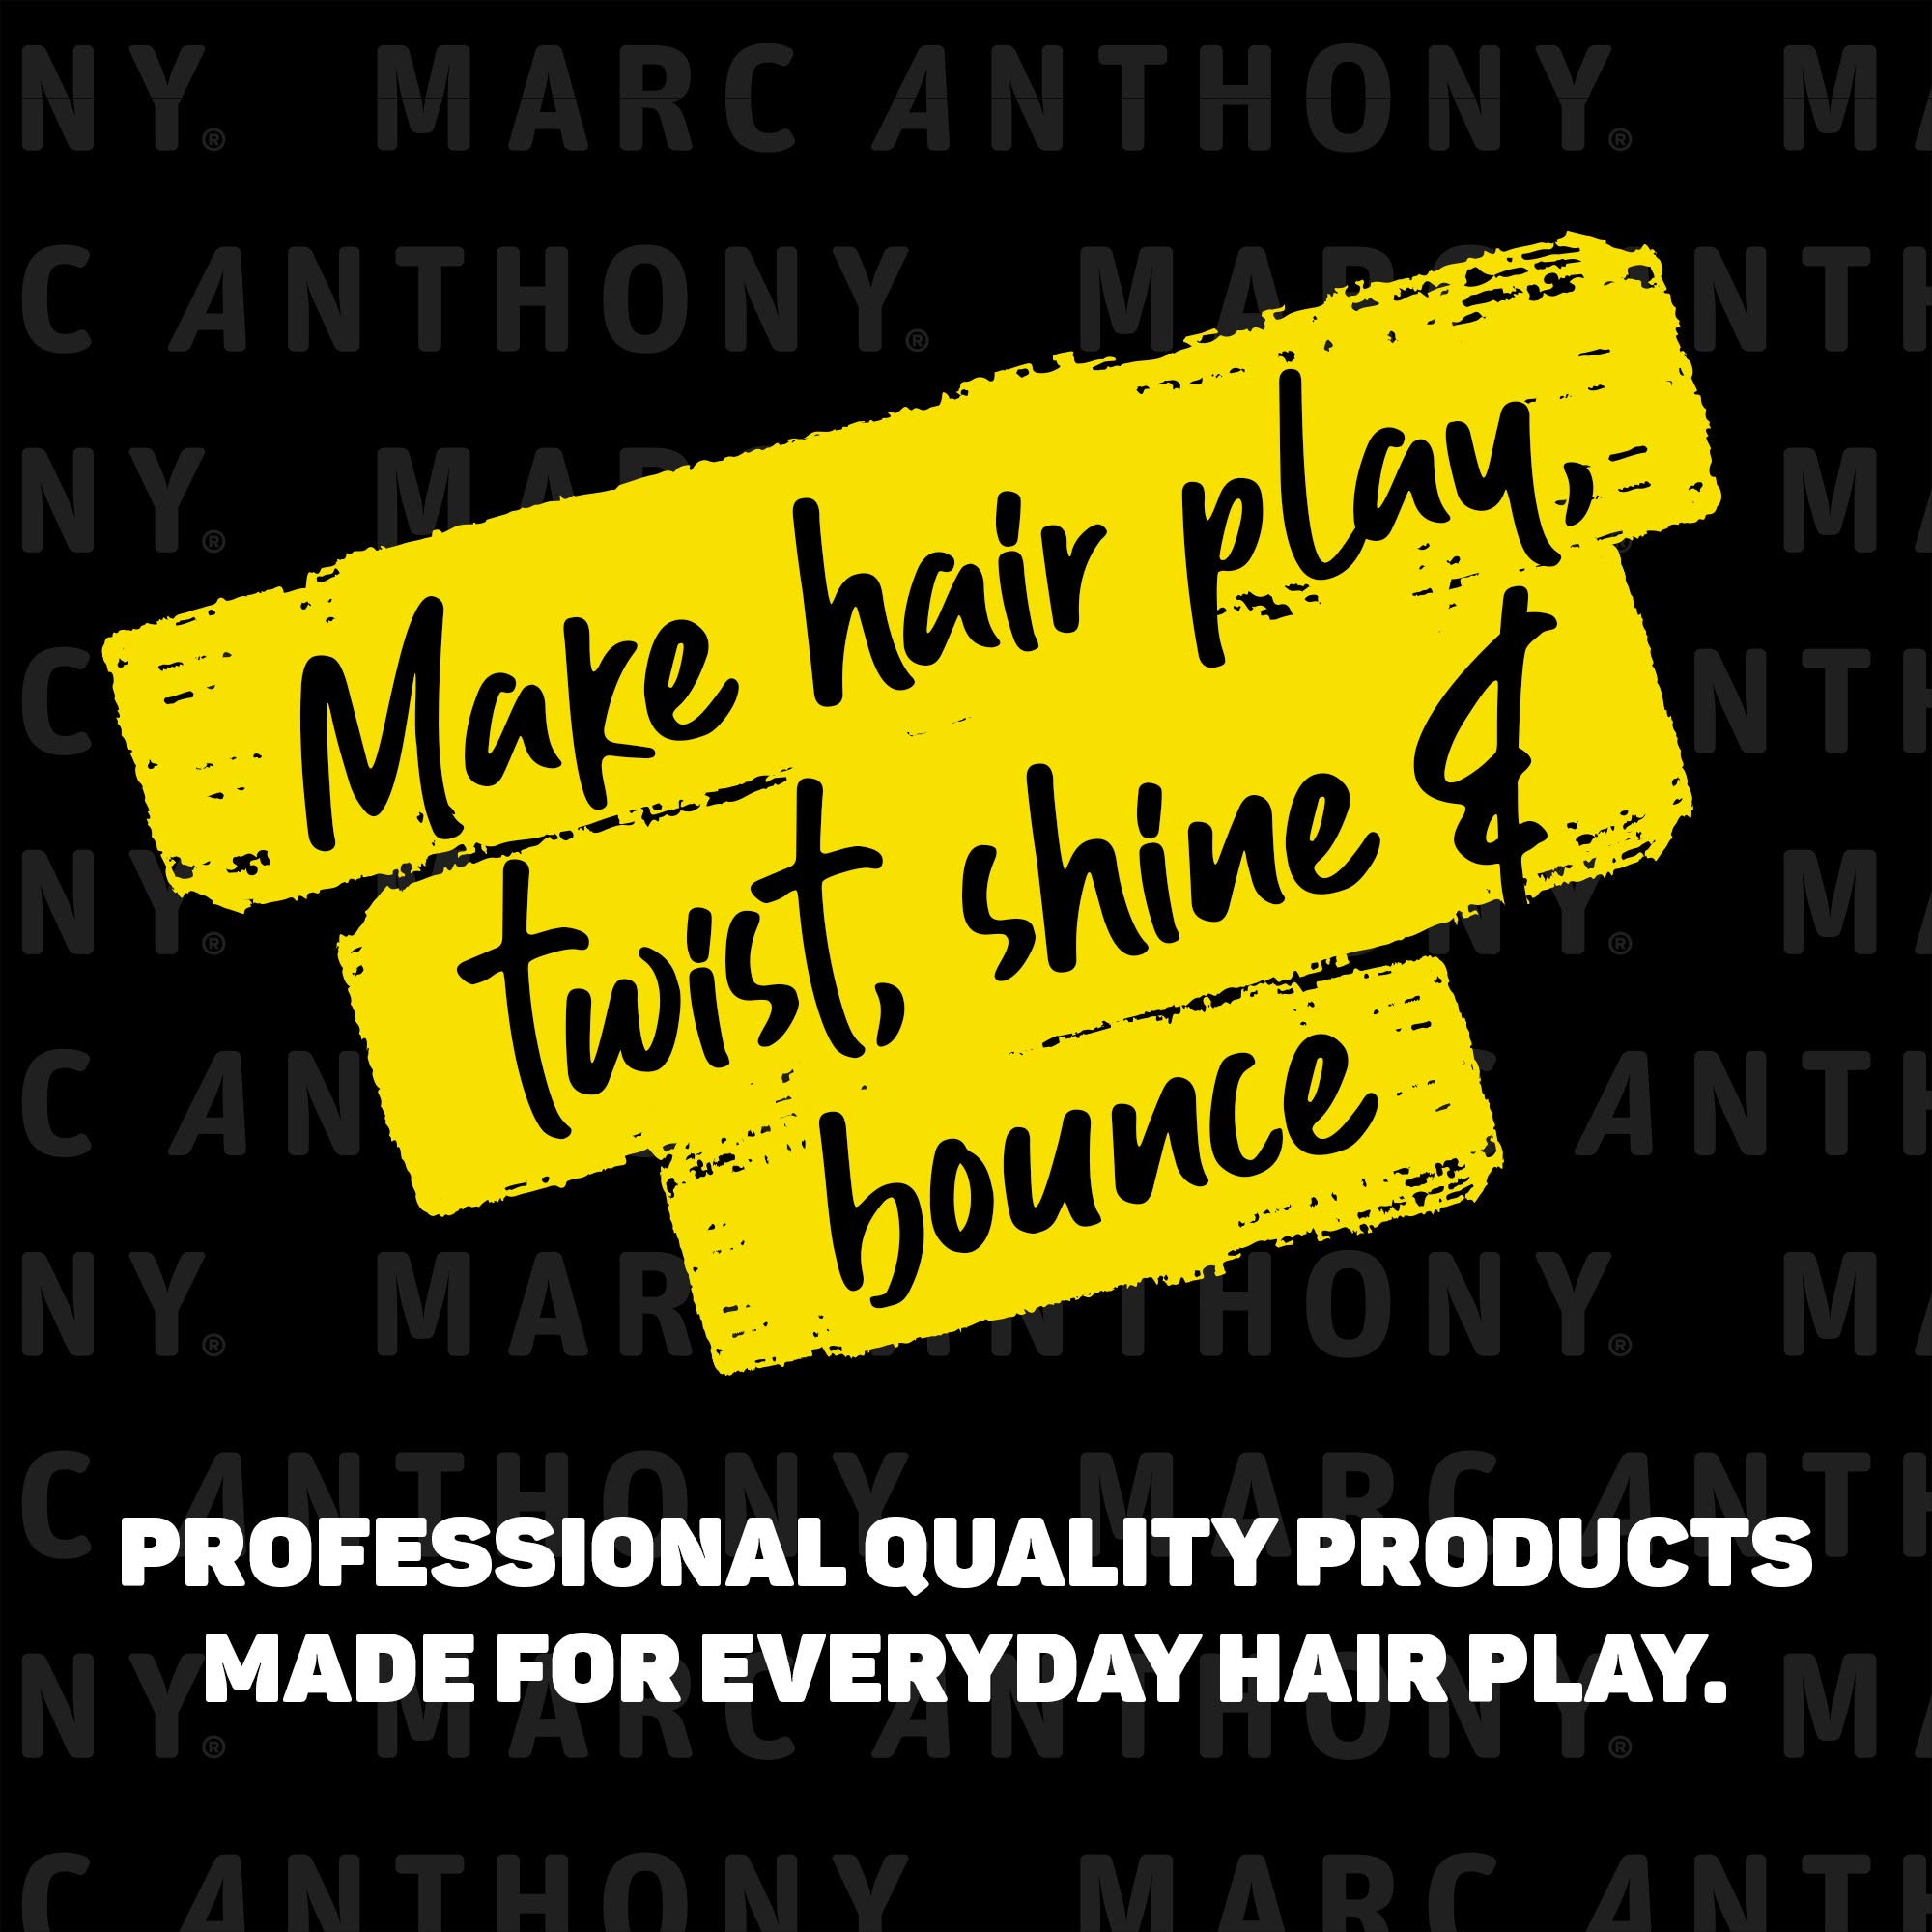 Marc Anthony Shampoo and Conditioner Gift Set, Grow Long Biotin - Anti-Frizz Deep Conditioner For Split Ends & Breakage - Vitamin E, Caffeine & Ginseng for Curly, Dry & Damaged Hair